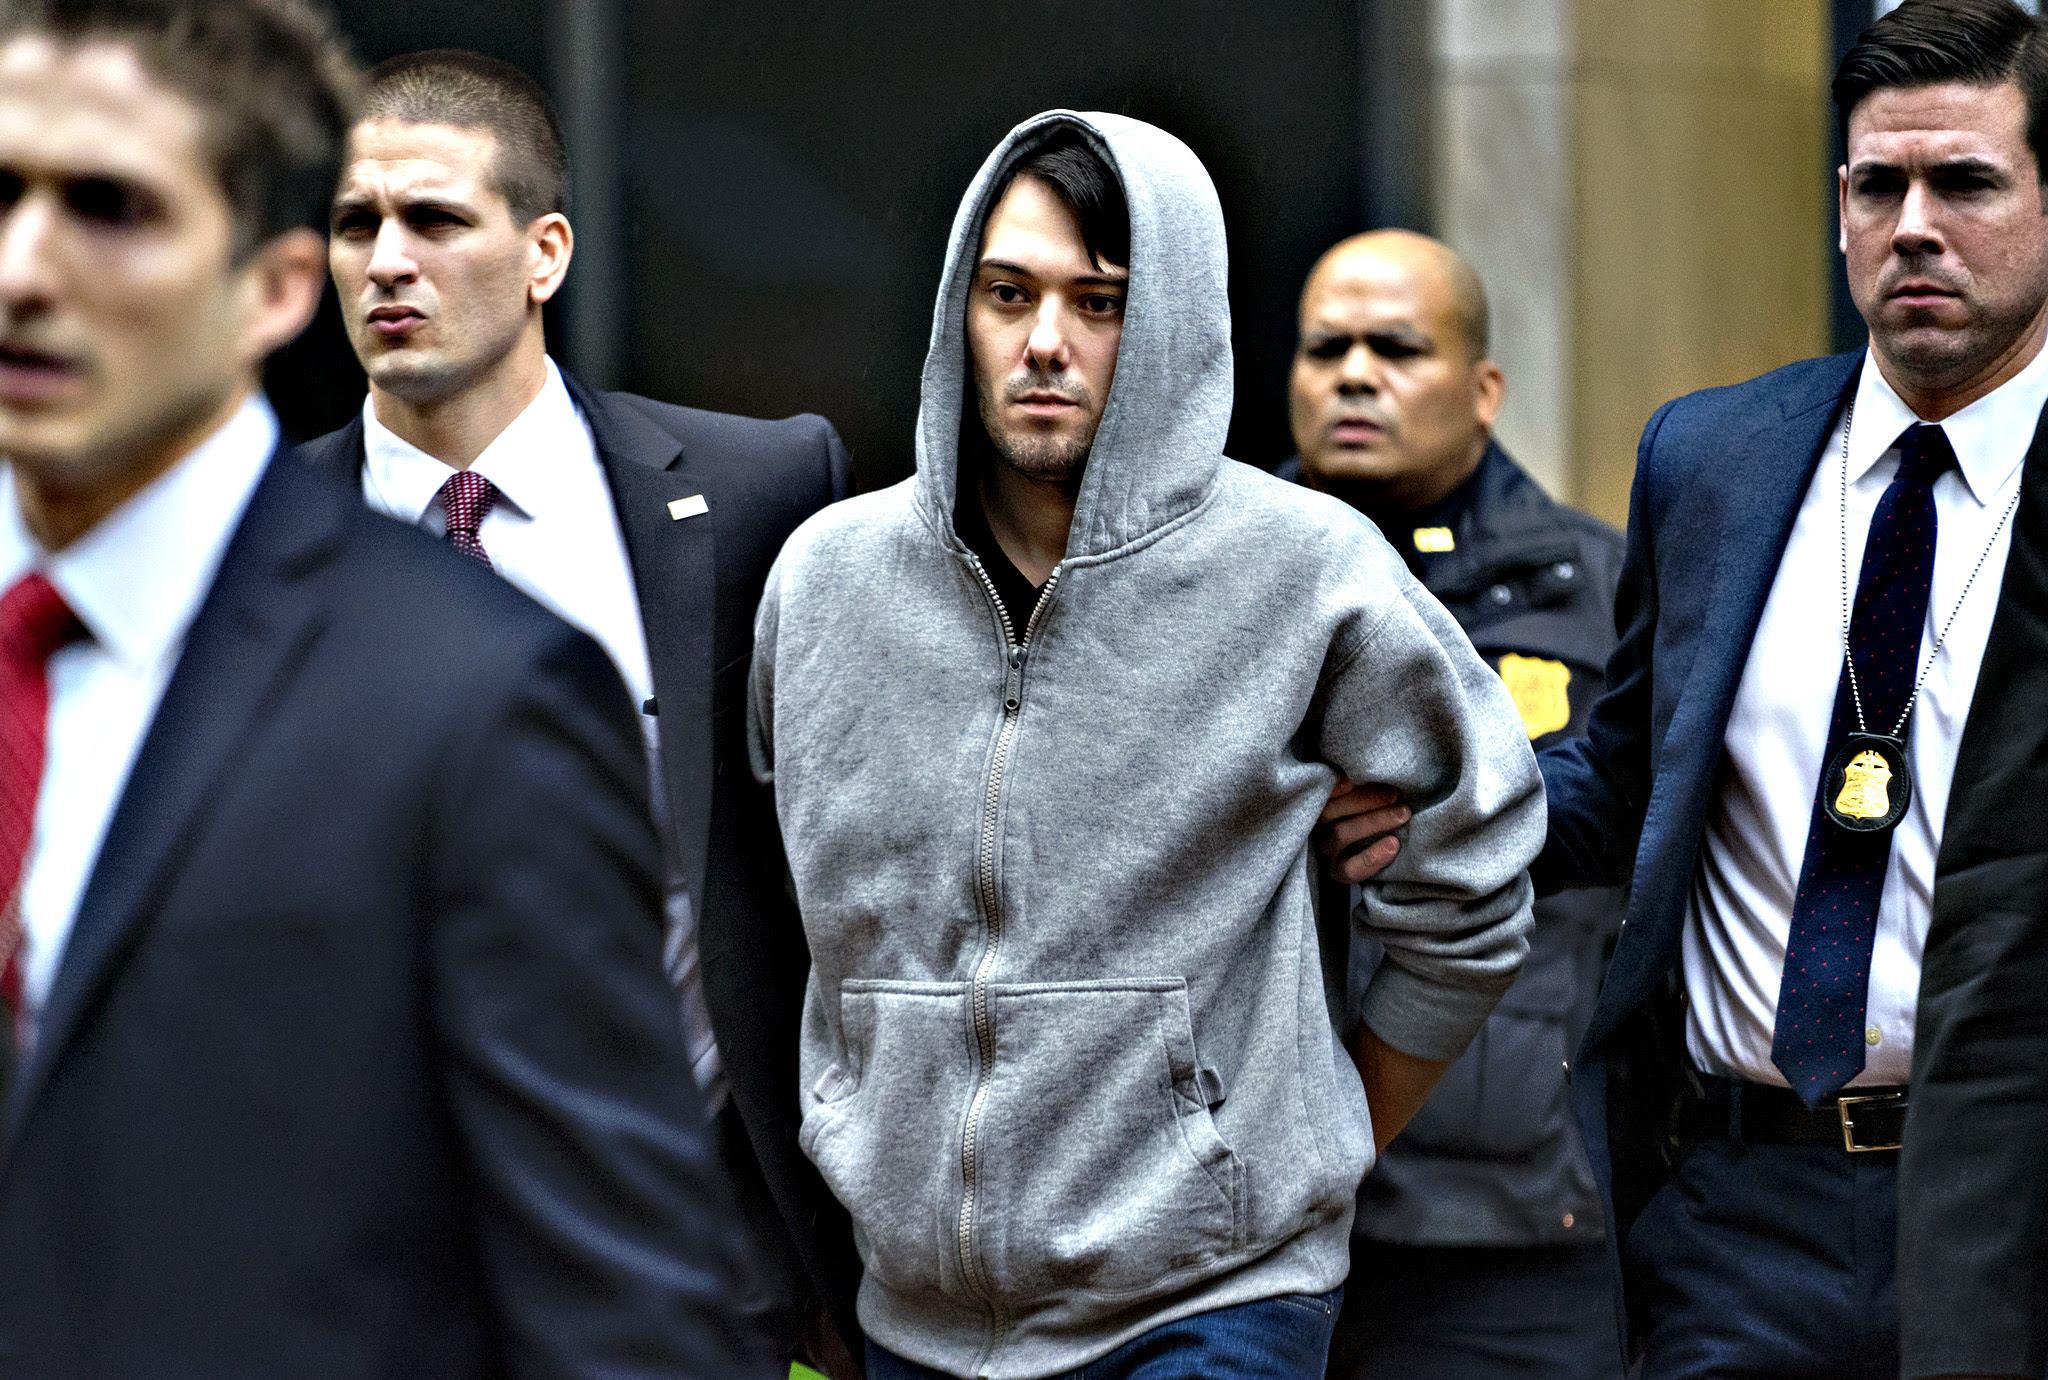 Martin Shkreli, the former hedge fund manager under fire for buying a pharmaceutical company and ratcheting up the price of a life-saving drug, is escorted by law enforcement agents in New York Thursday, Dec. 17, 2015, after being taken into custody following a securities probe. A seven-count indictment unsealed in Brooklyn federal court Thursday charged Shkreli with conspiracy to commit securities fraud, conspiracy to commit wire fraud and securities fraud.